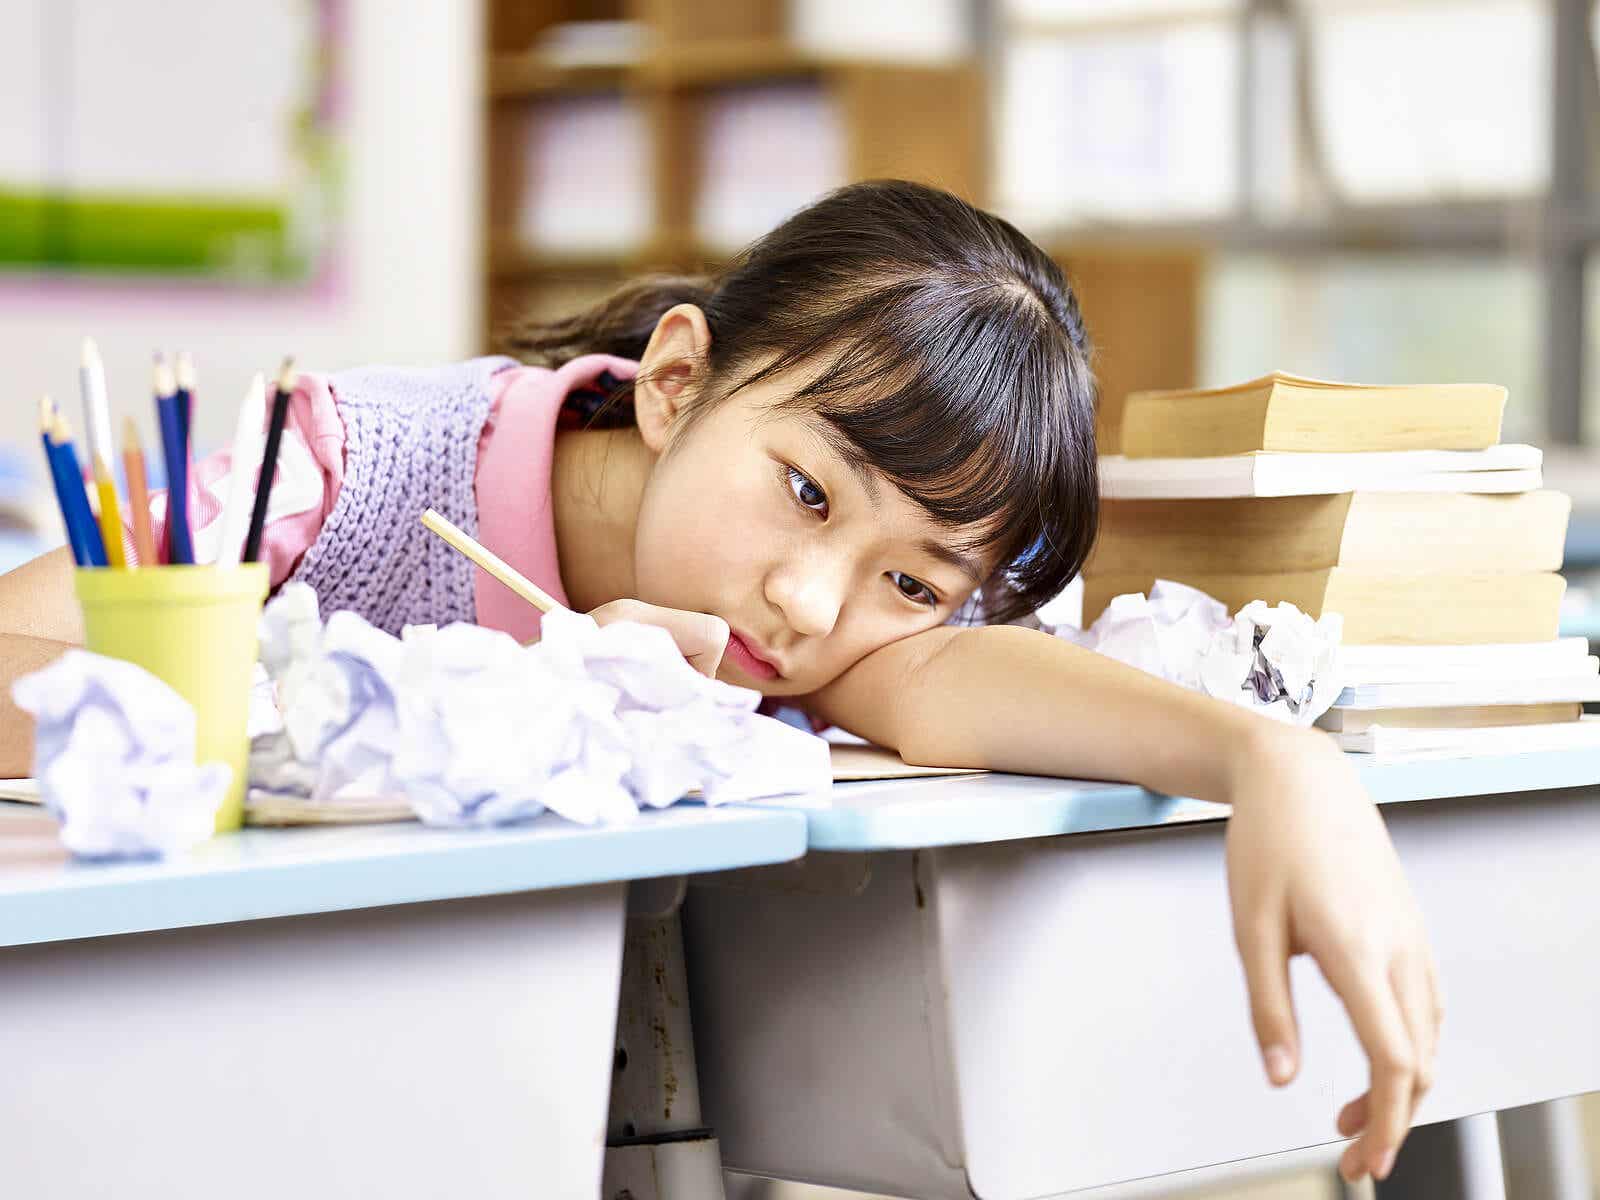 A preteen girl with her head on her school desk surrounded by crumpled up papers, looking bored.